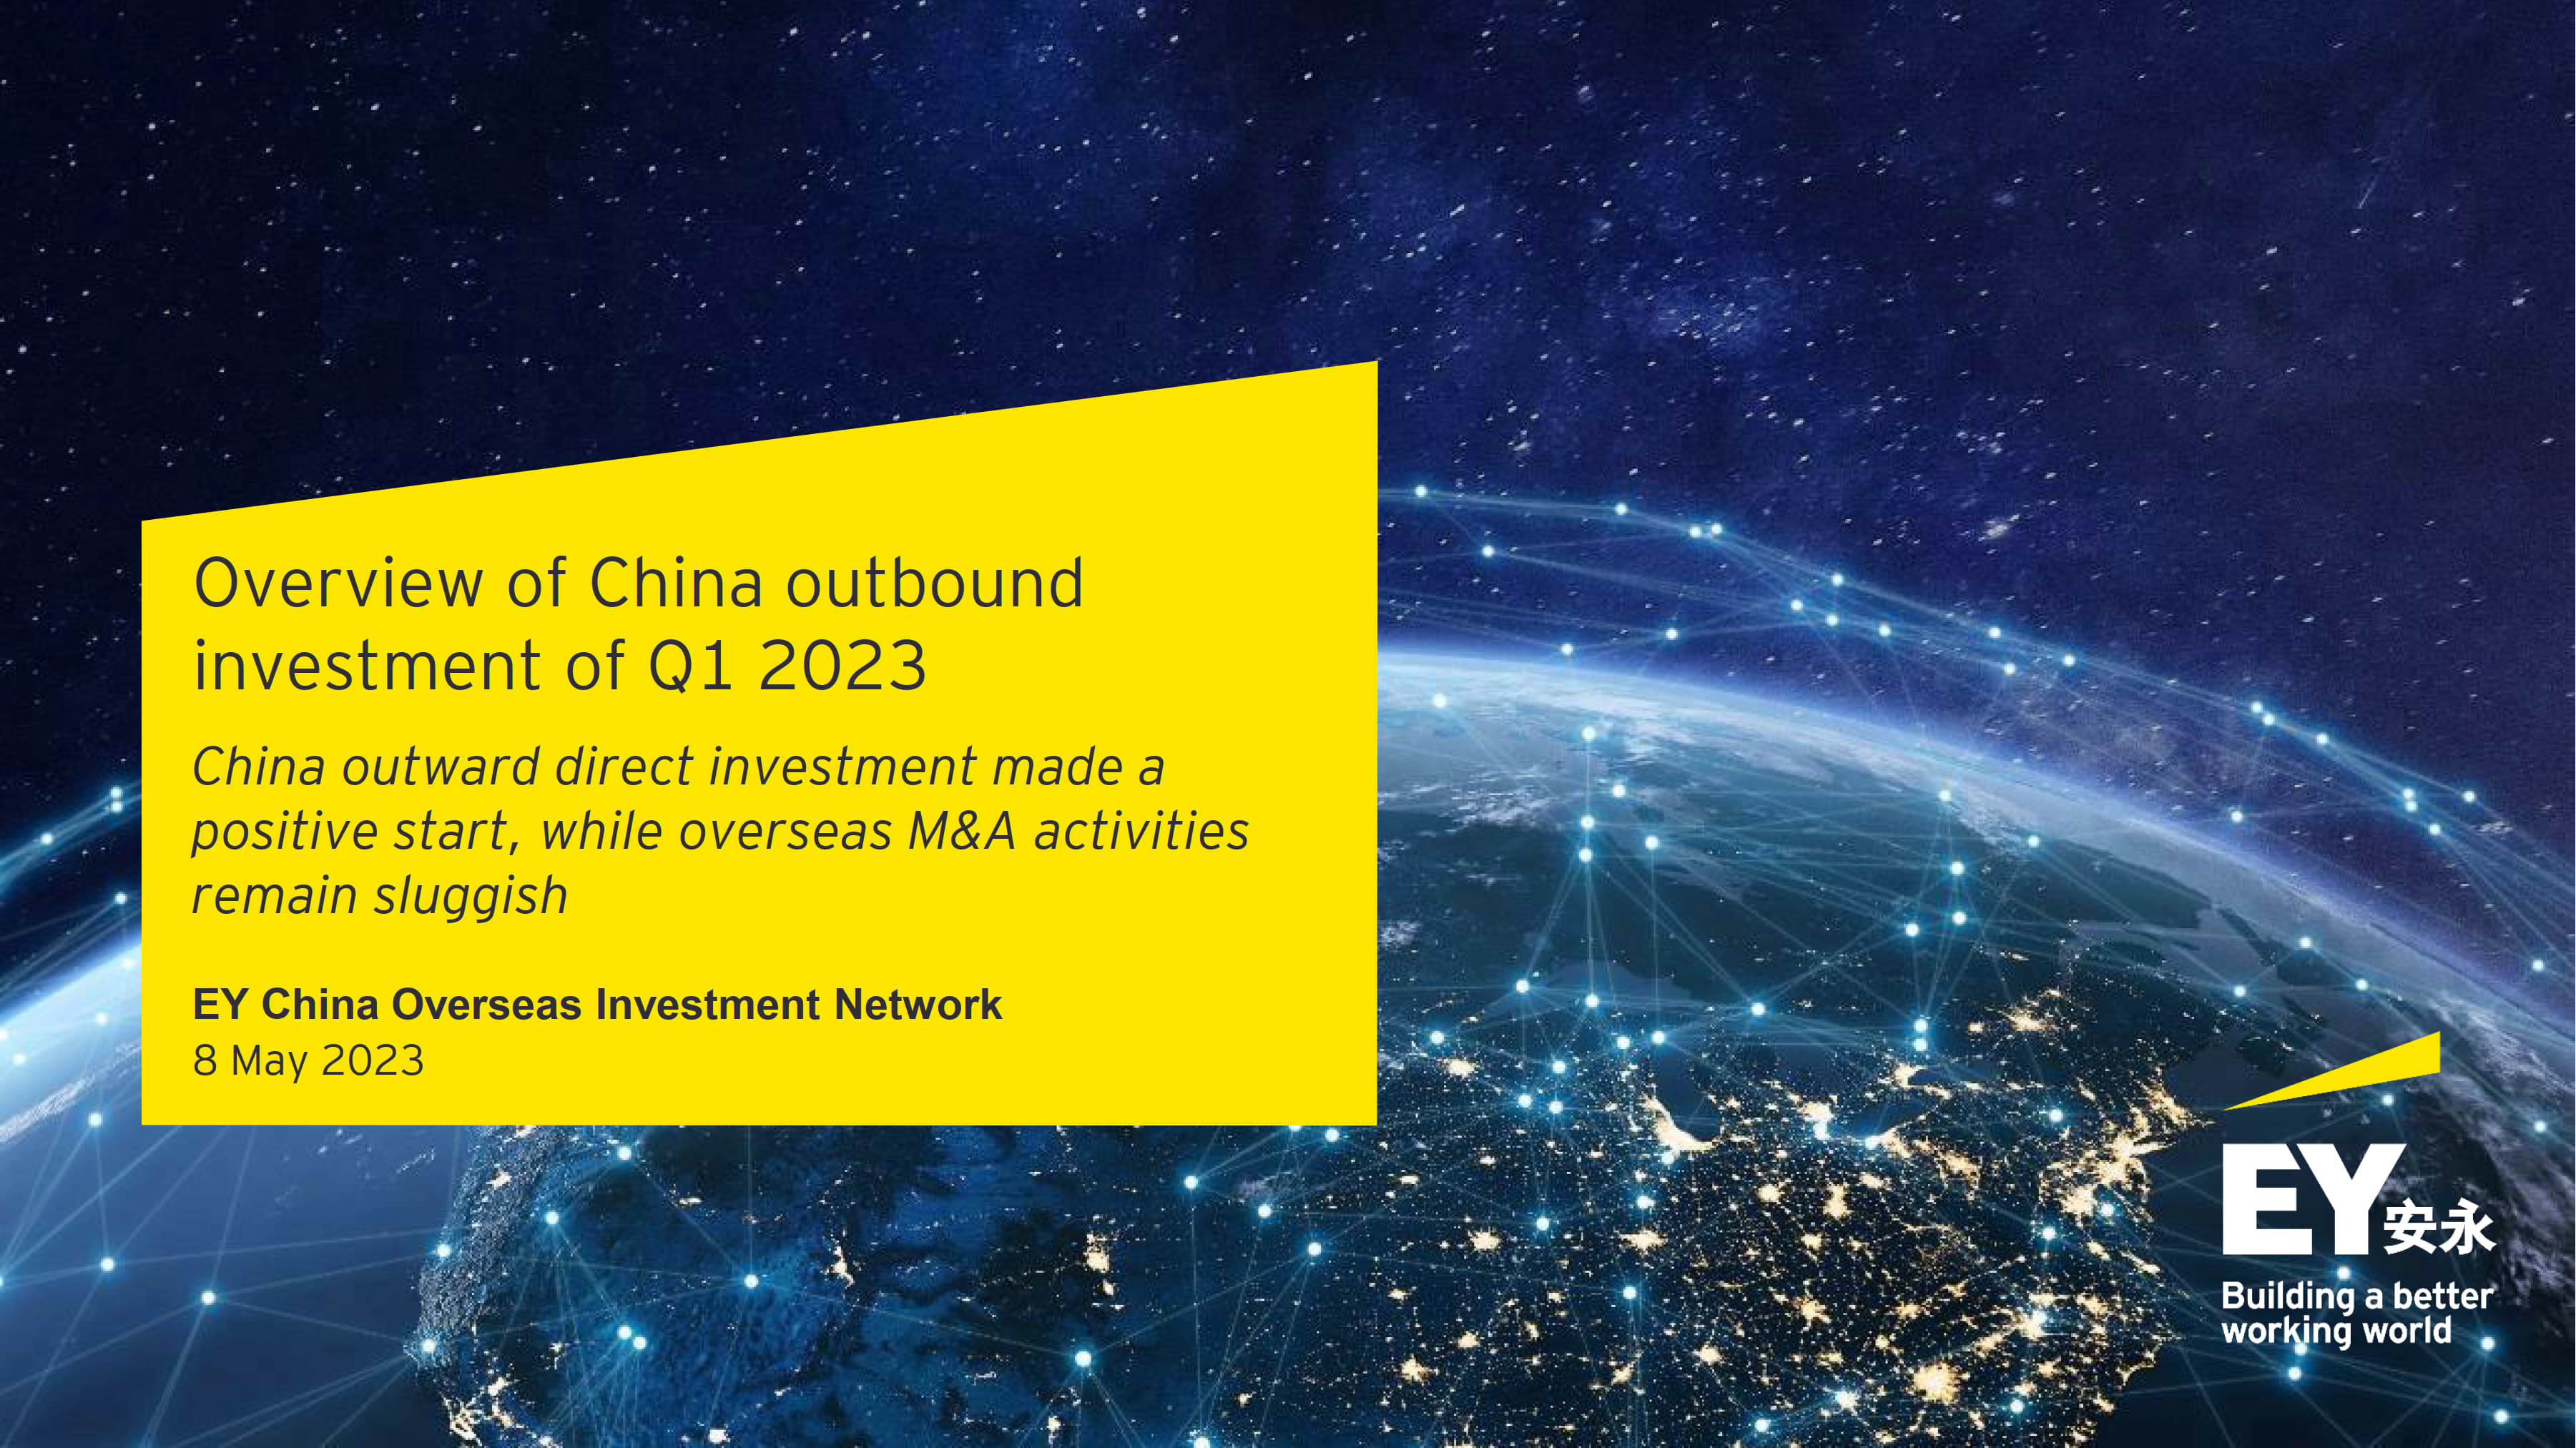 Overview of China outbound investment of Q1 2023